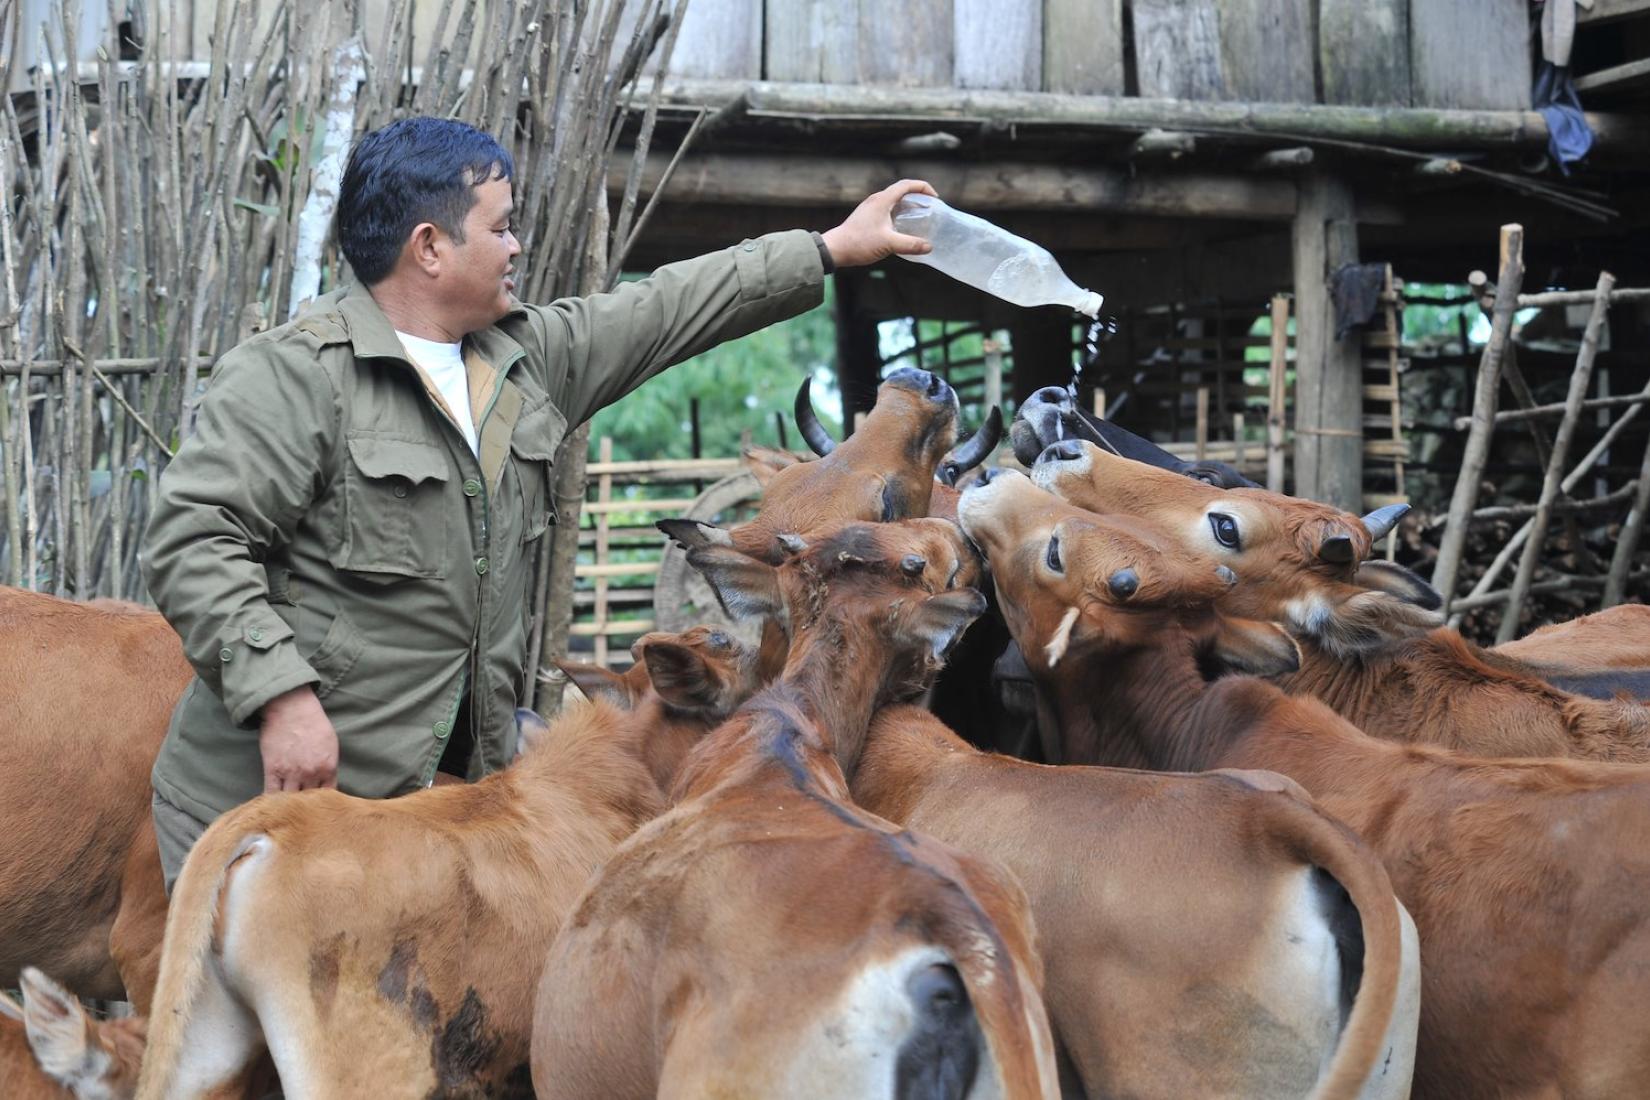 Man feeding group of calves with a bottle